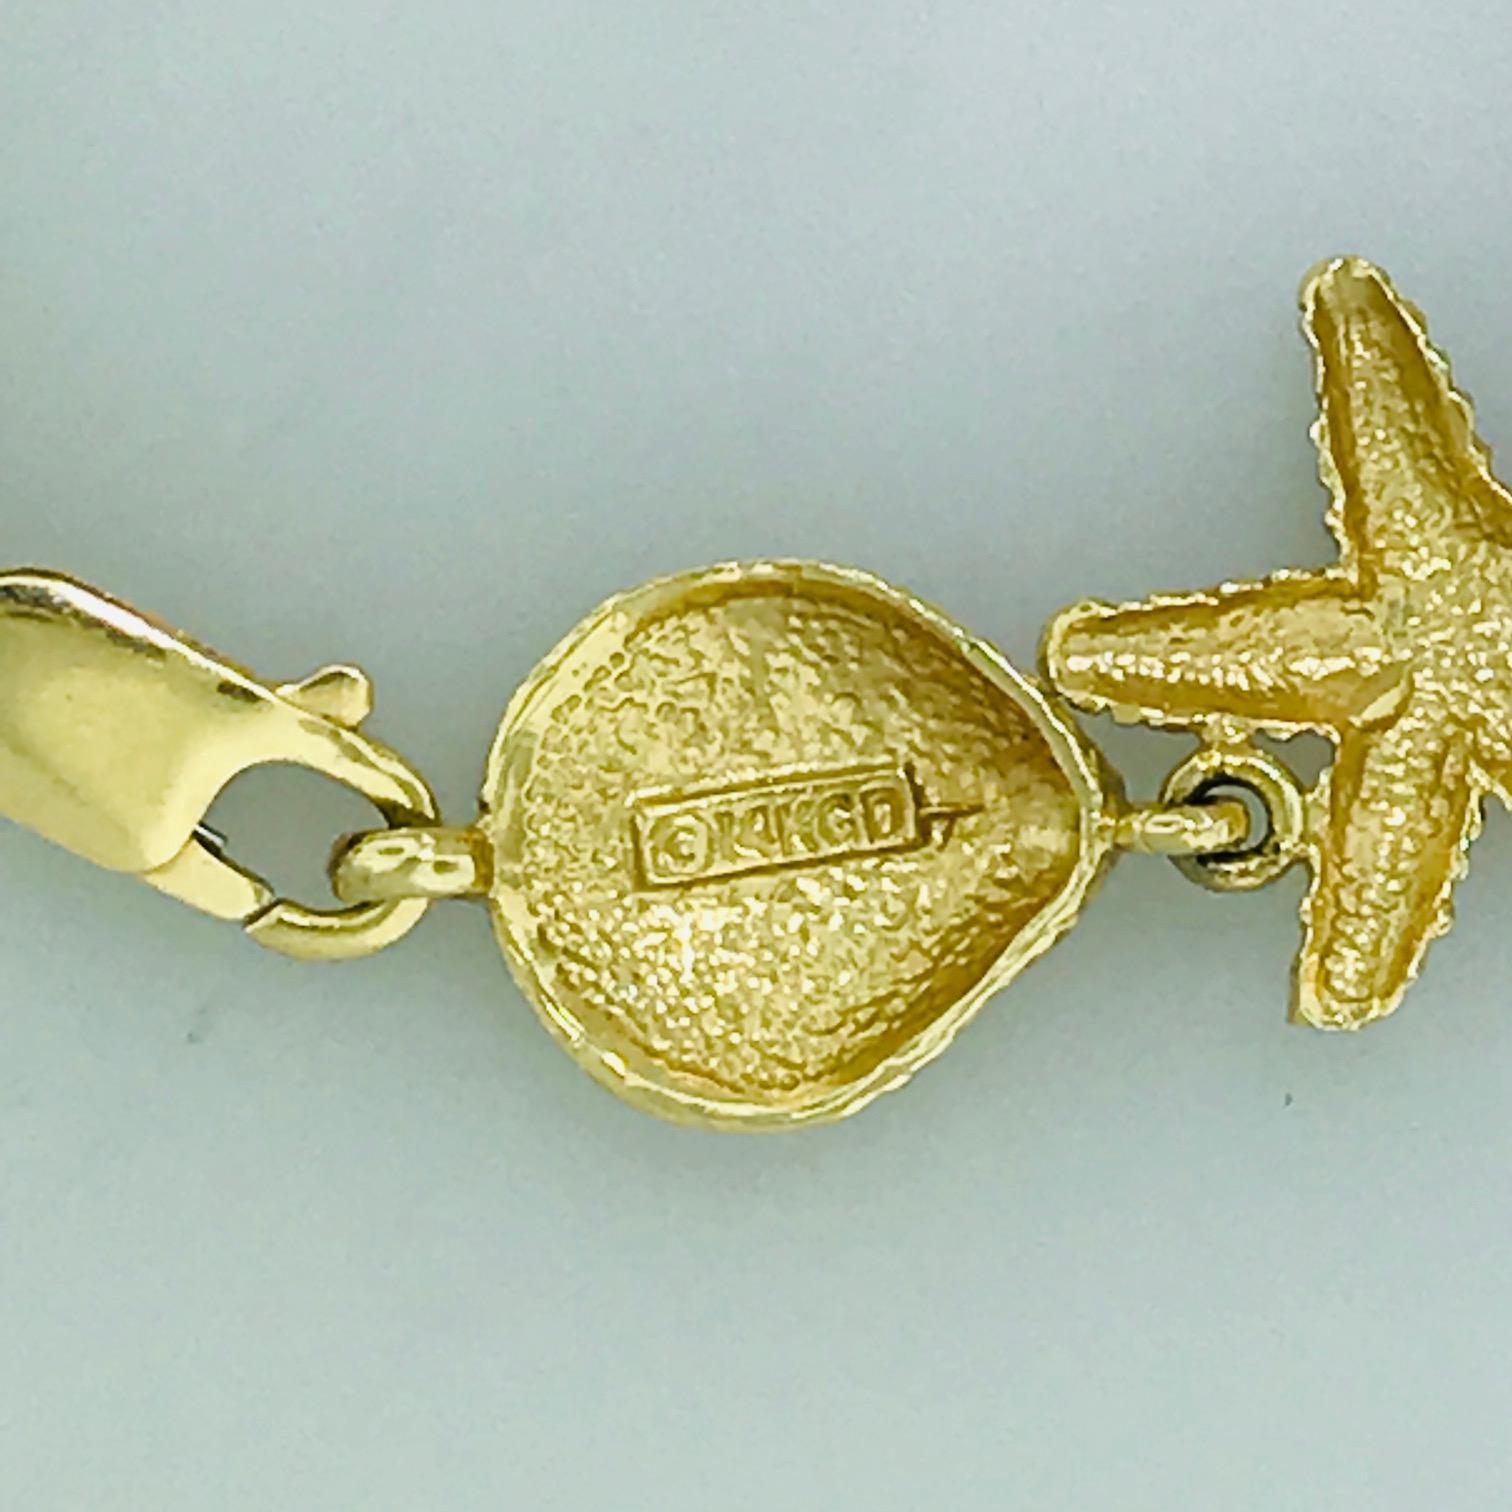 Sea Life Yellow Gold Bracelet with Large Shell, Starfish, Sea Dollars In New Condition For Sale In Austin, TX